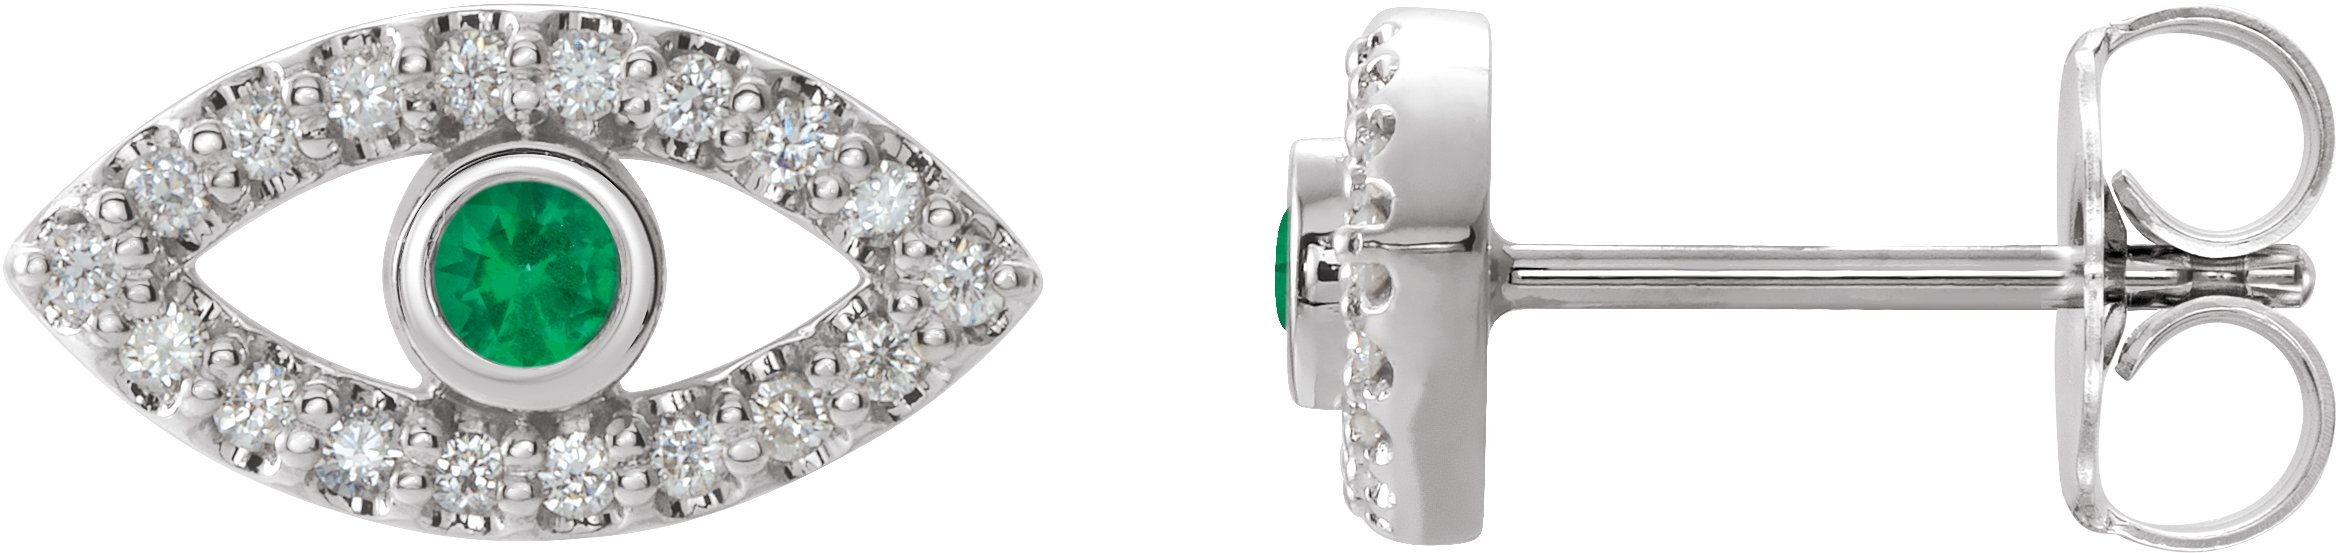 Sterling Silver Emerald and White Sapphire Earrings Ref. 15594060